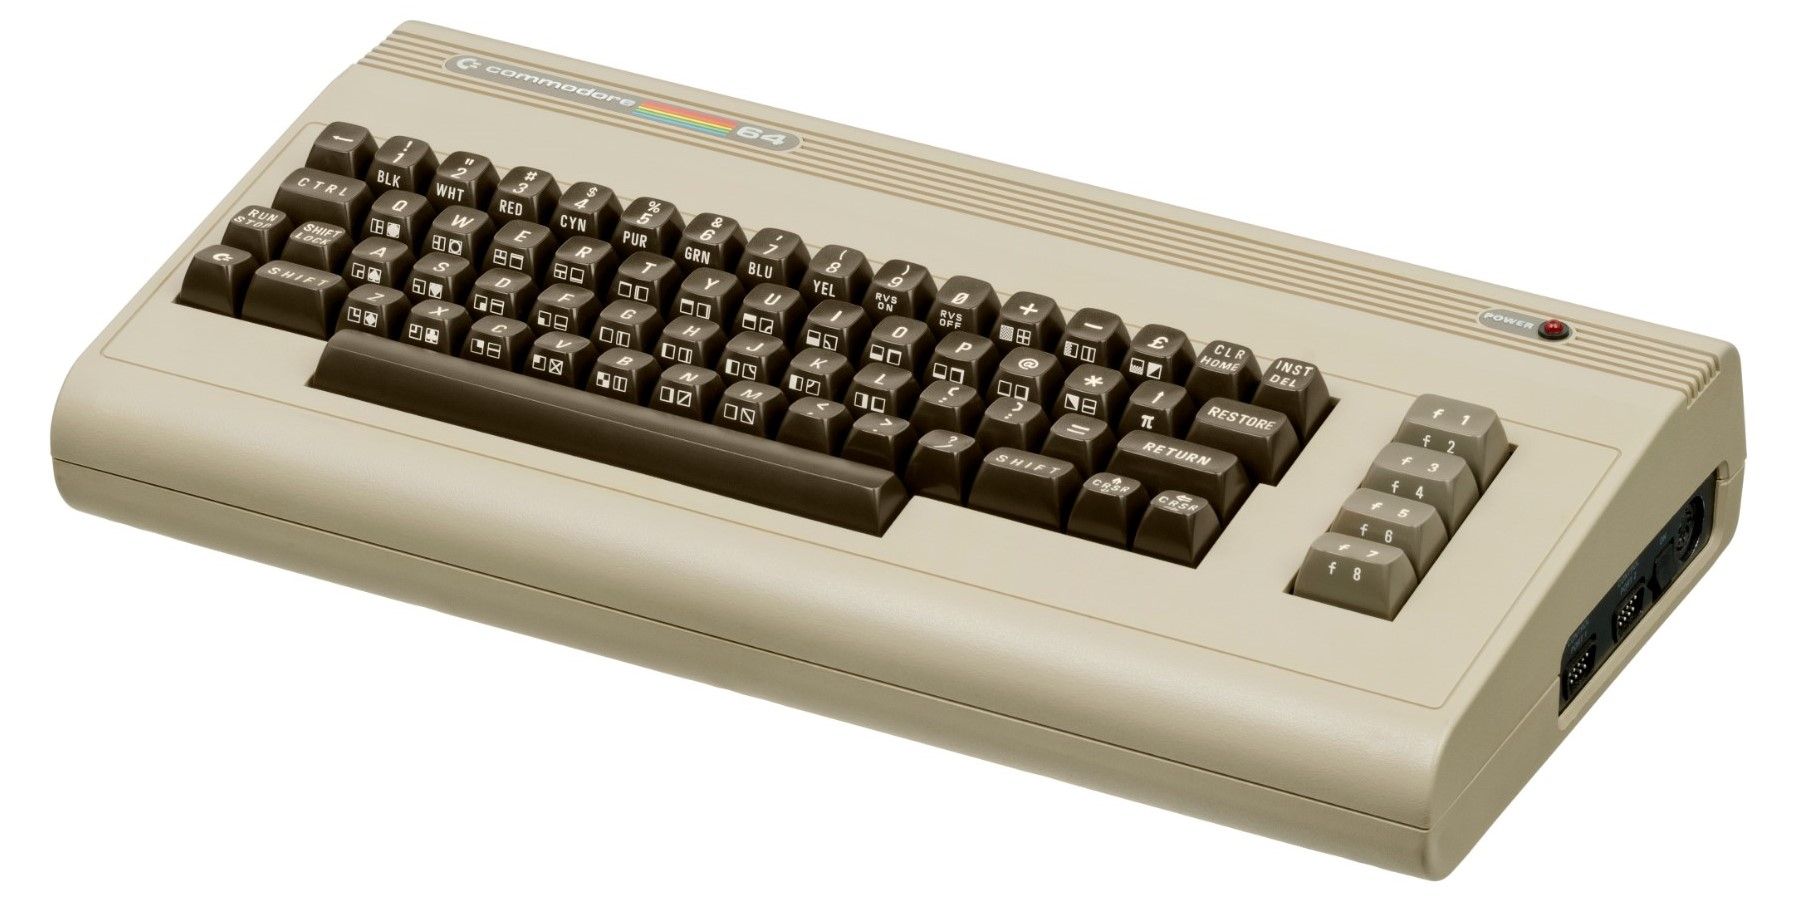 commodore-64-unit-and-keyboard